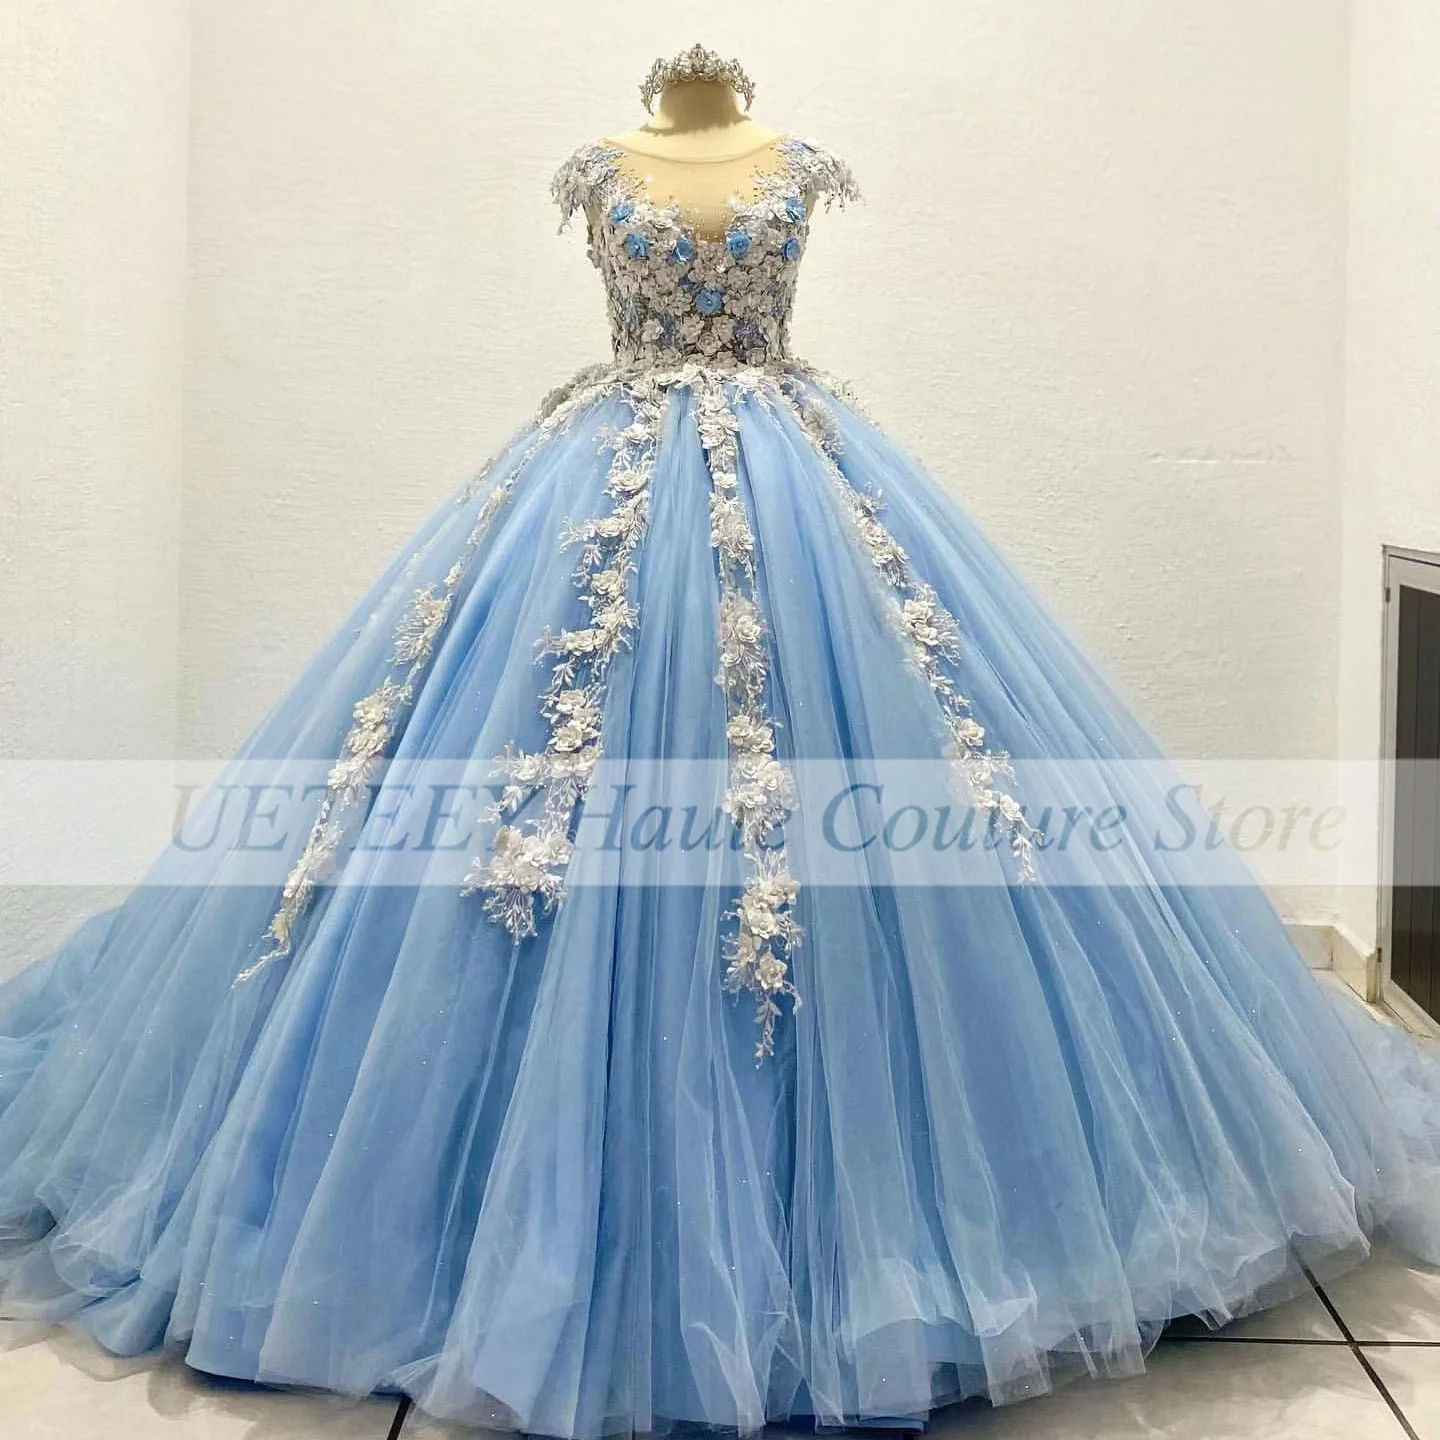 New Light Blue Quinceanera Dress For 16 Girl Beading 3D Flowers Princess Ball Gowns Birthday Prom Gowns Vestidos De 15 Años